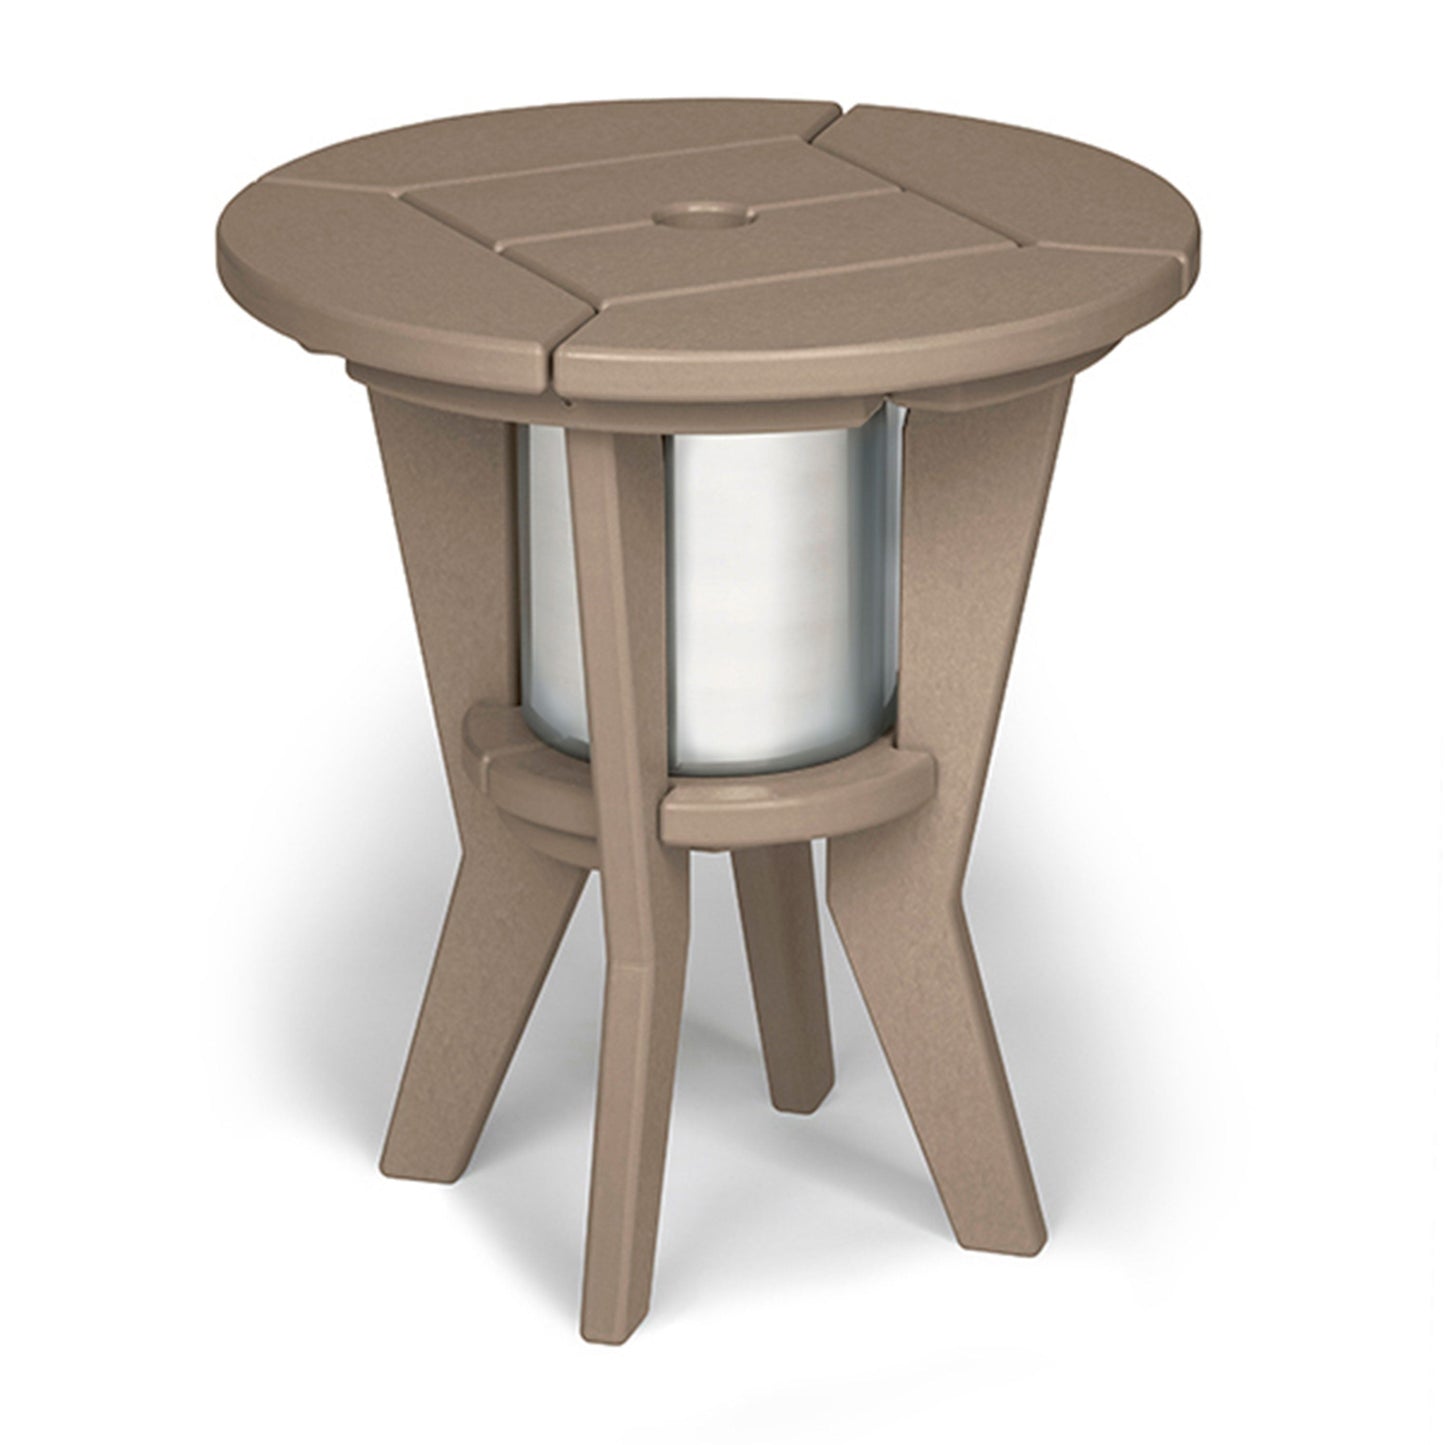 Chill Side Beverage Table